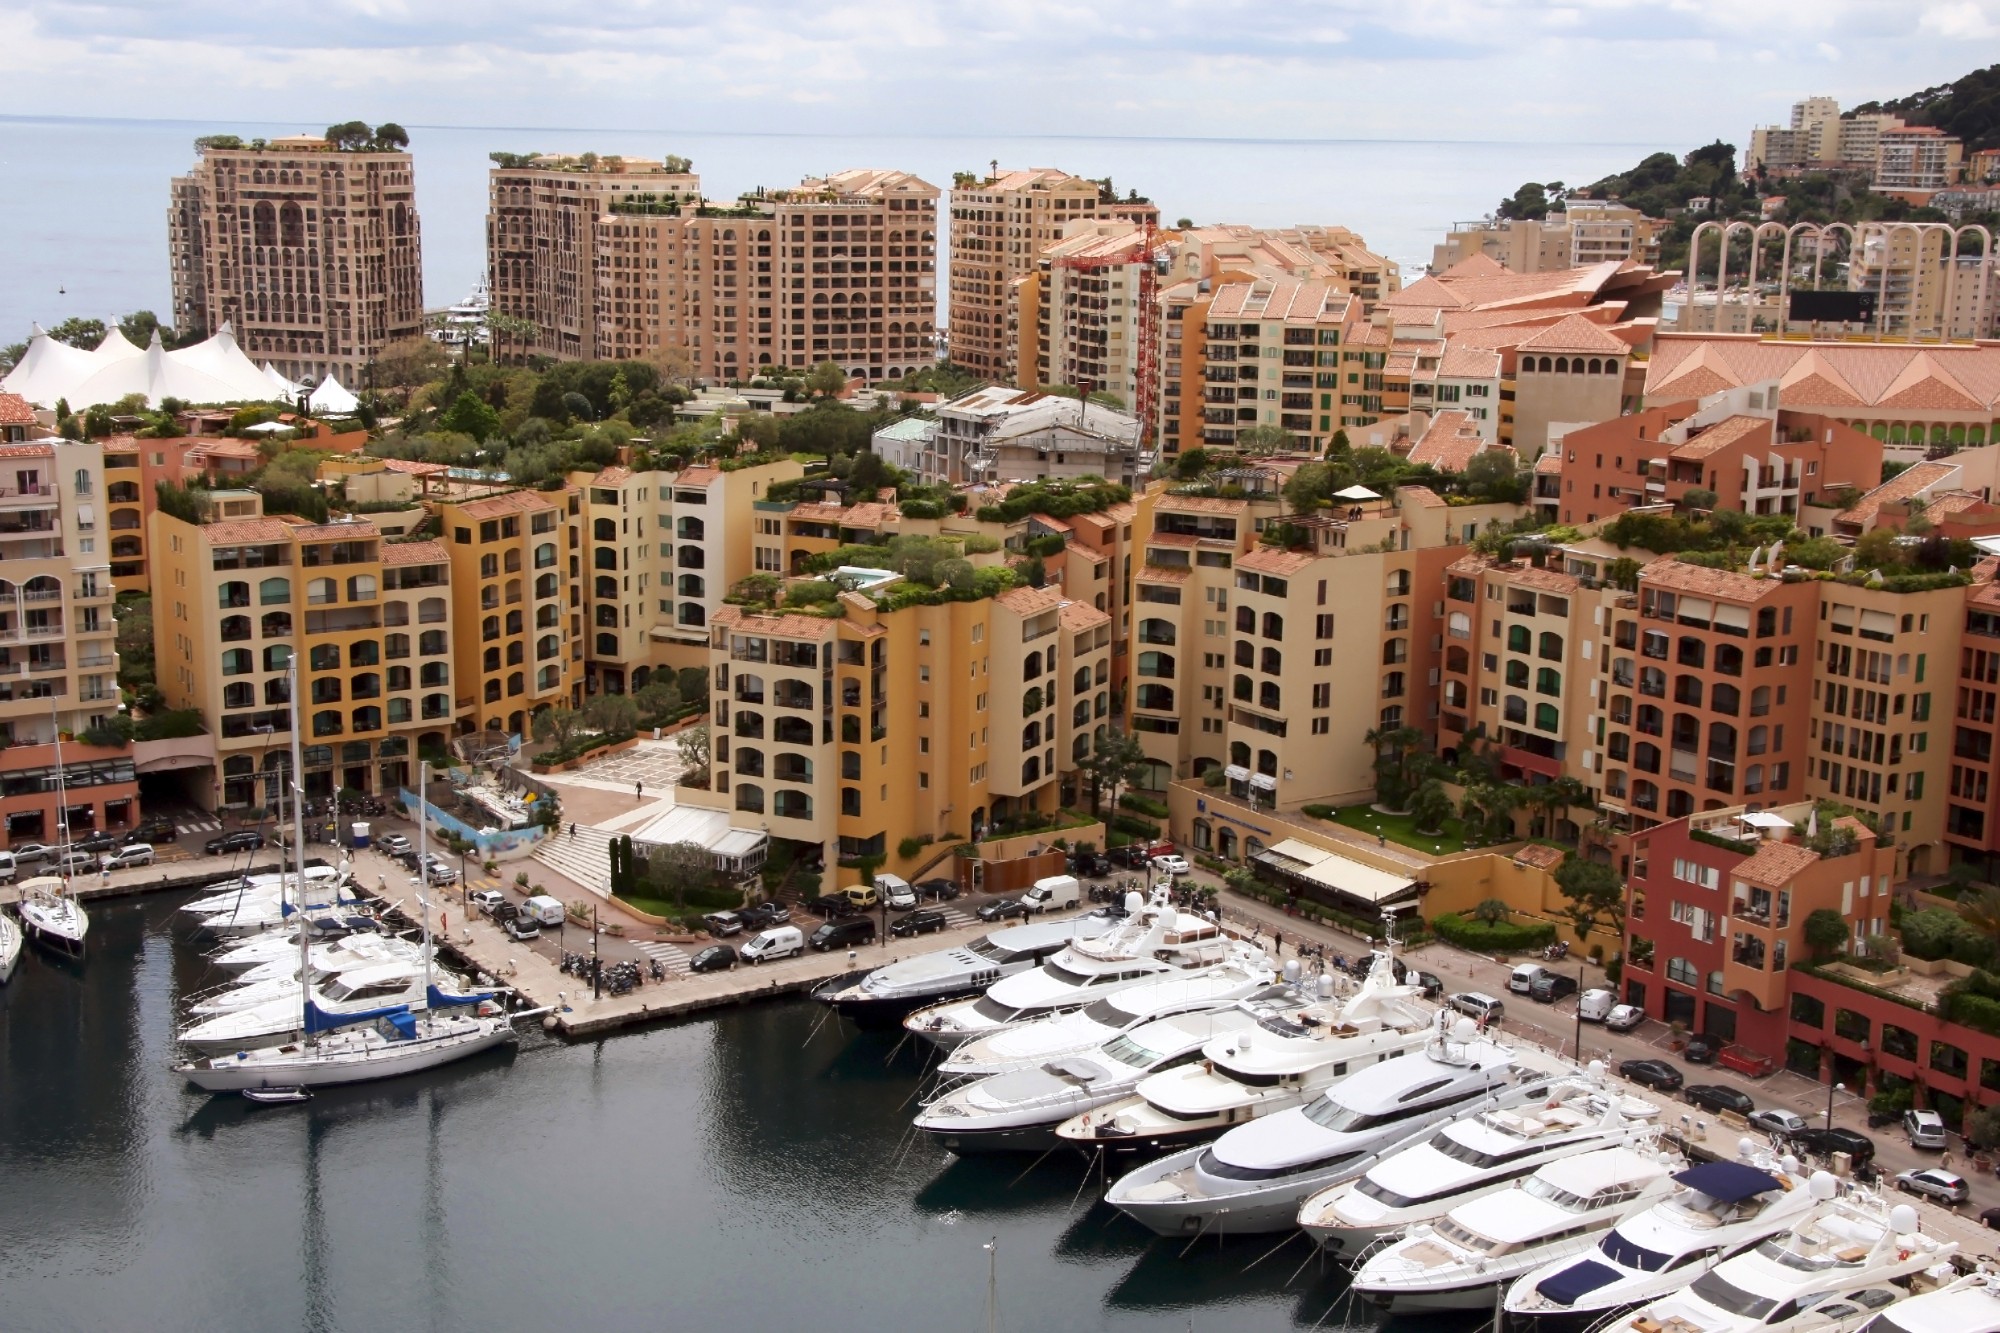 Mooring with yachts near many-storeyed buildings behind which the sea is visible